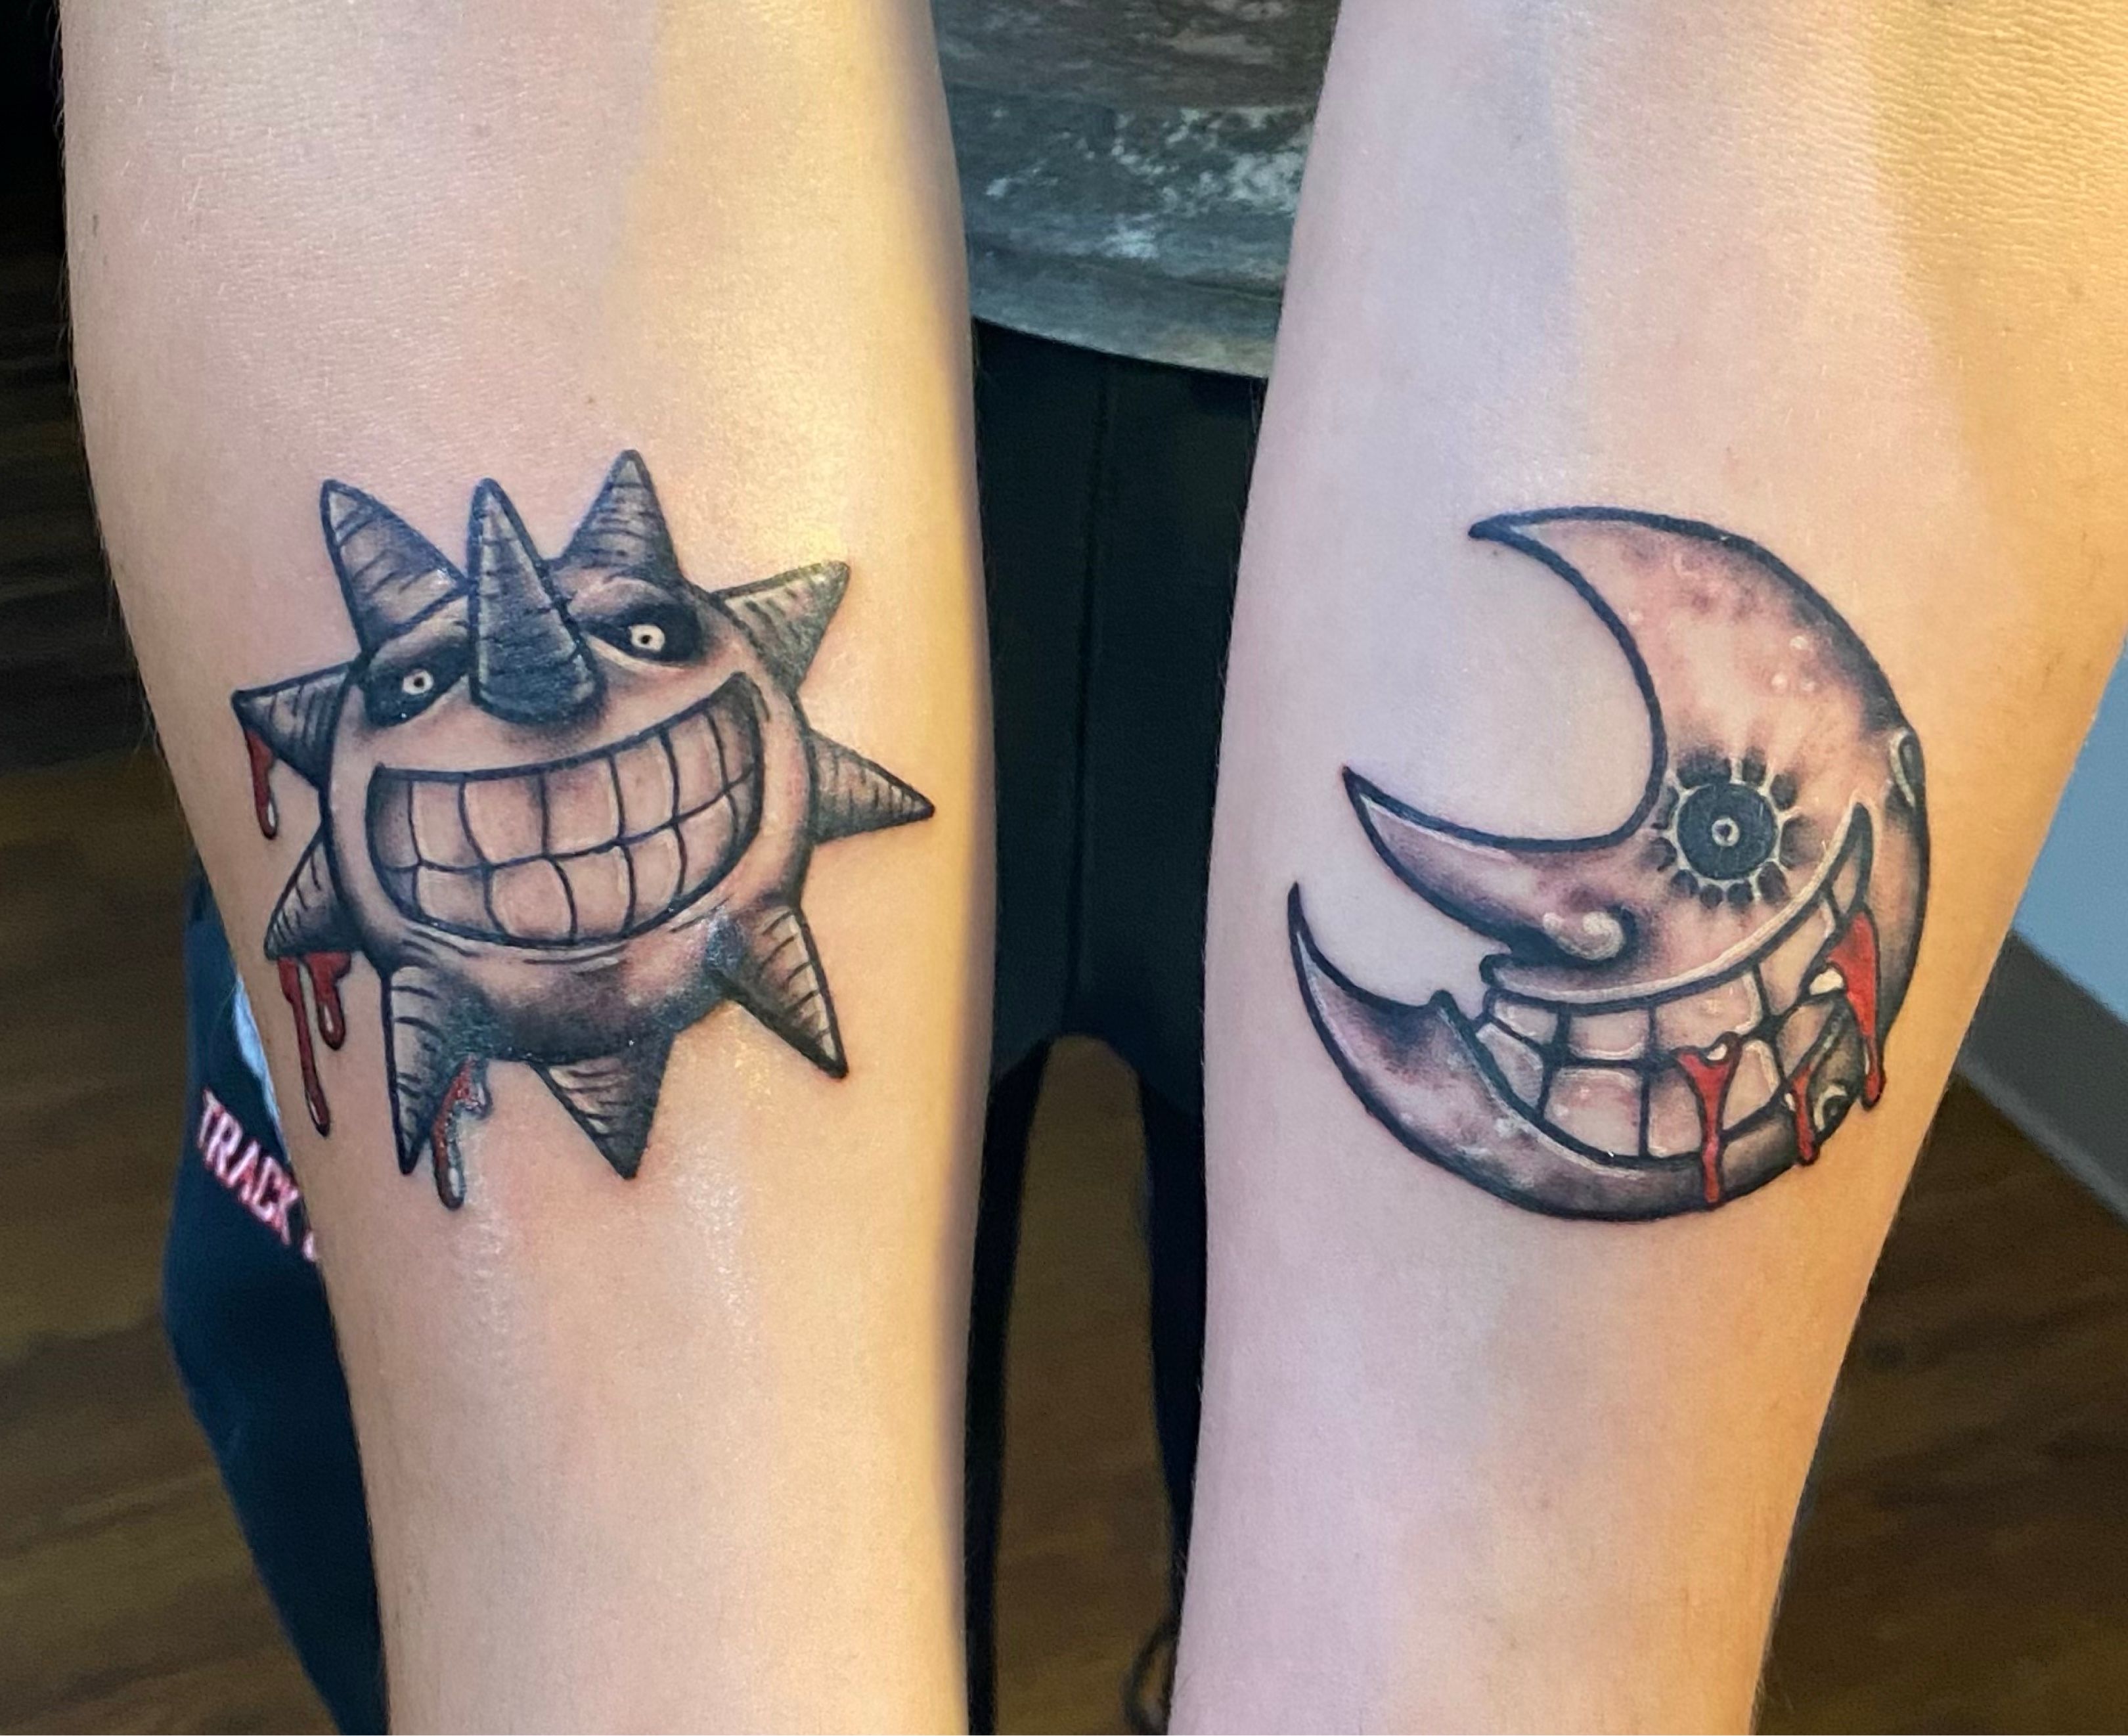 Noose Tattoos: Wear With Care • Tattoodo